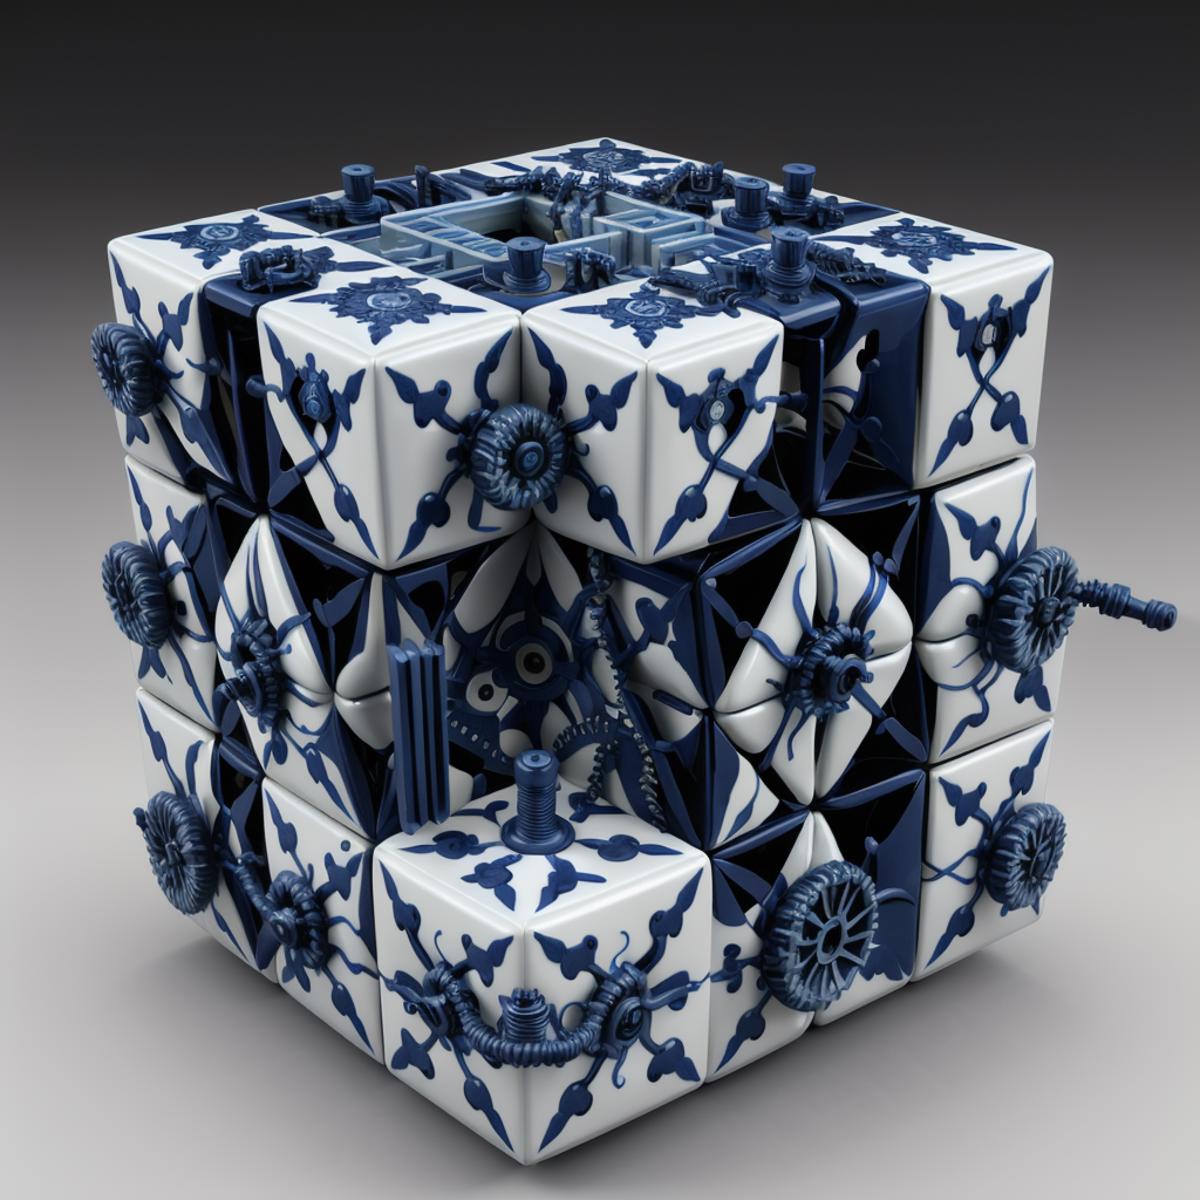 Realistic blue and white porcelain art style image by Isomorphi